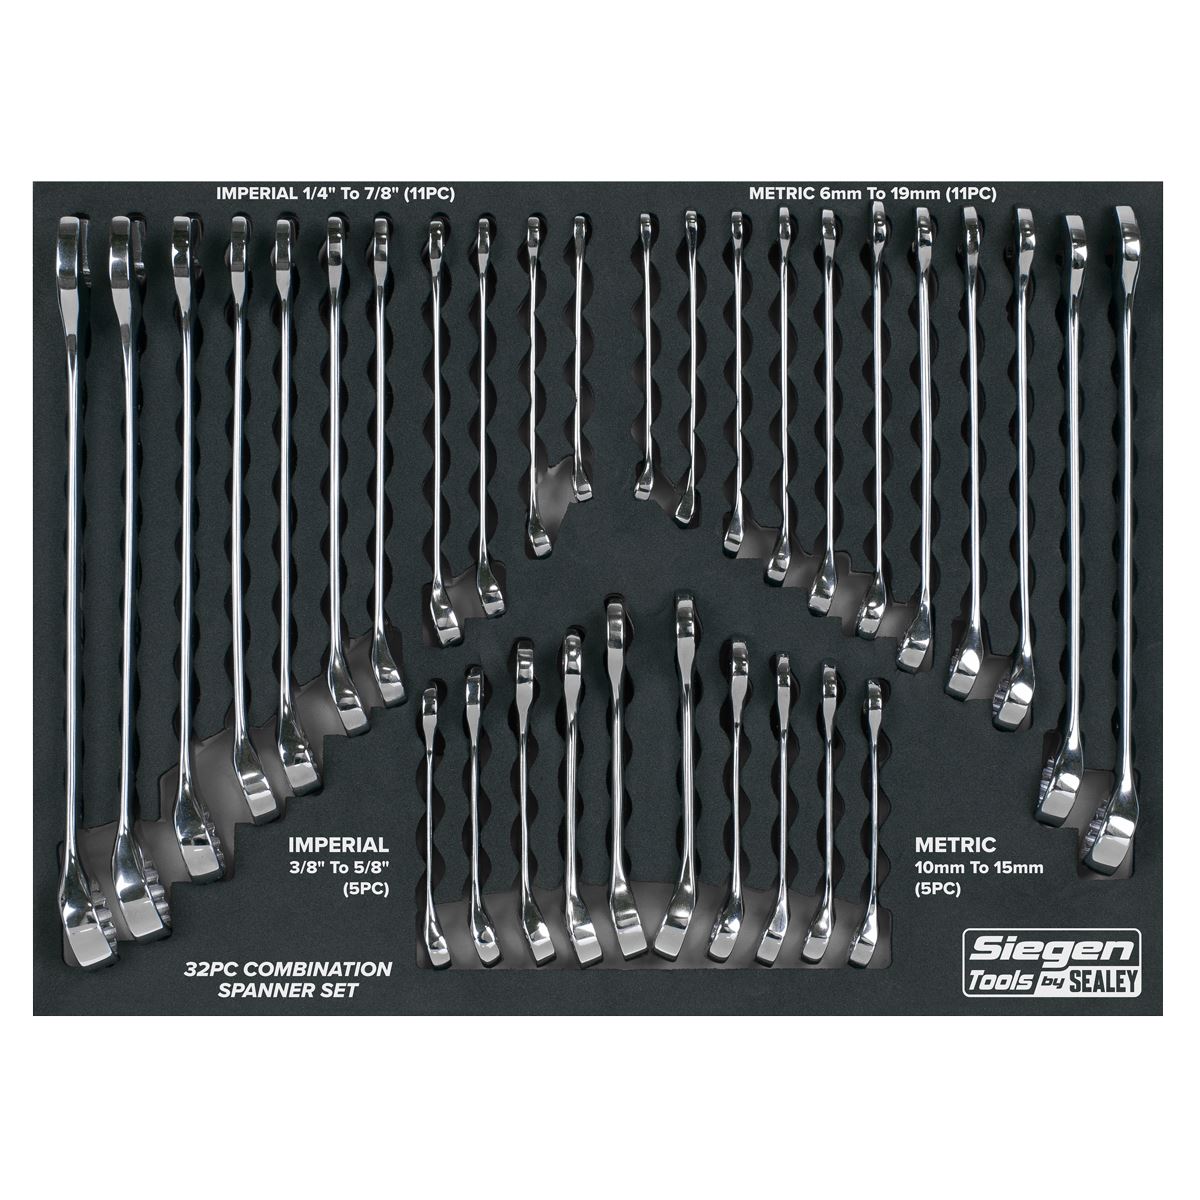 Siegen by Sealey Combination Spanner Set 32pc - Metric/Imperial